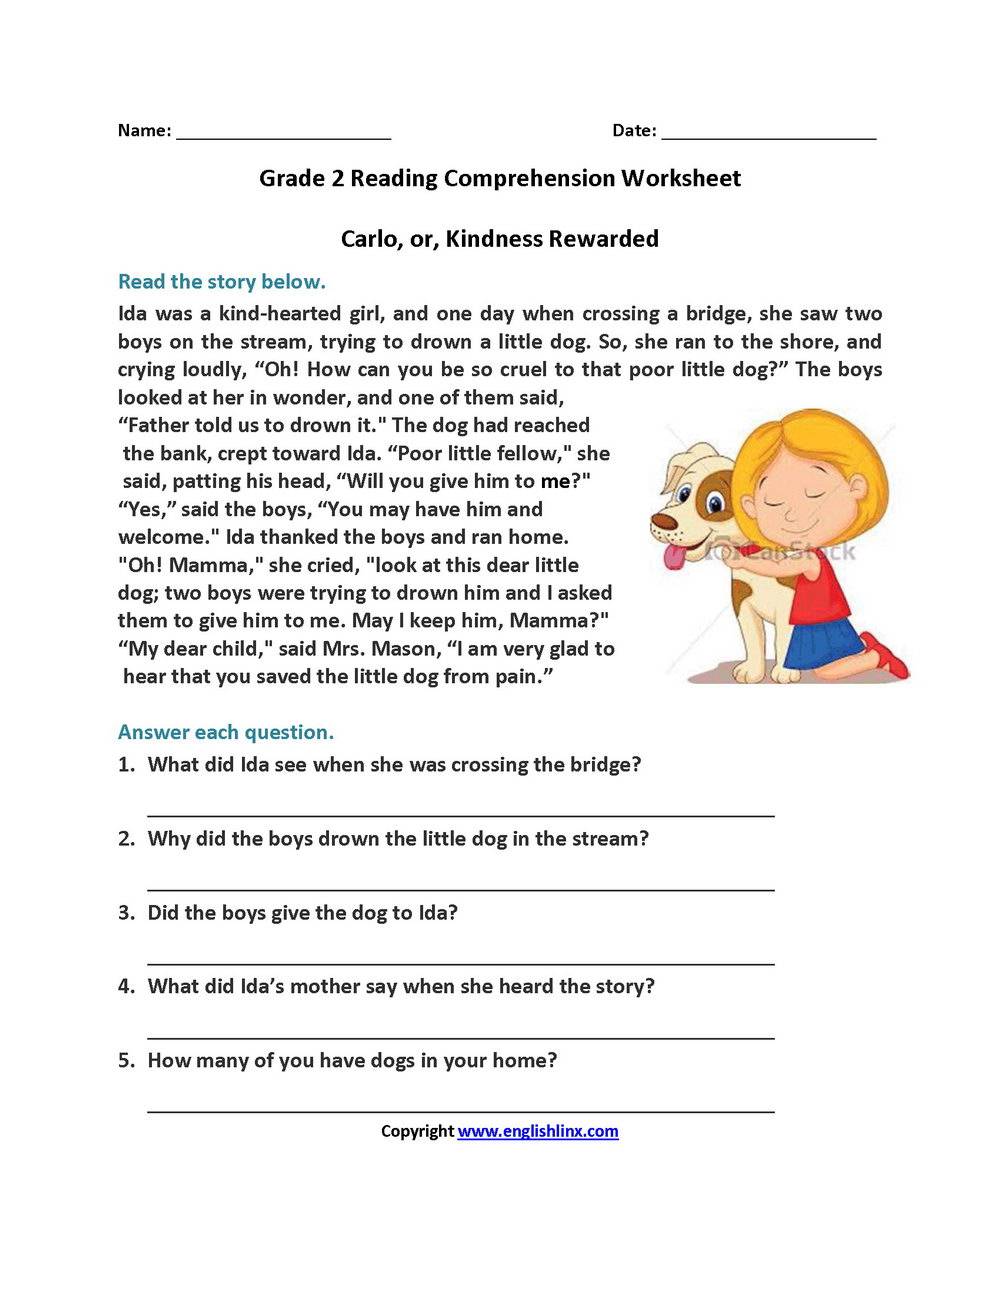 Free Science Reading Comprehension Worksheets Middle School | Mbm Legal | Free Printable Middle School Reading Comprehension Worksheets